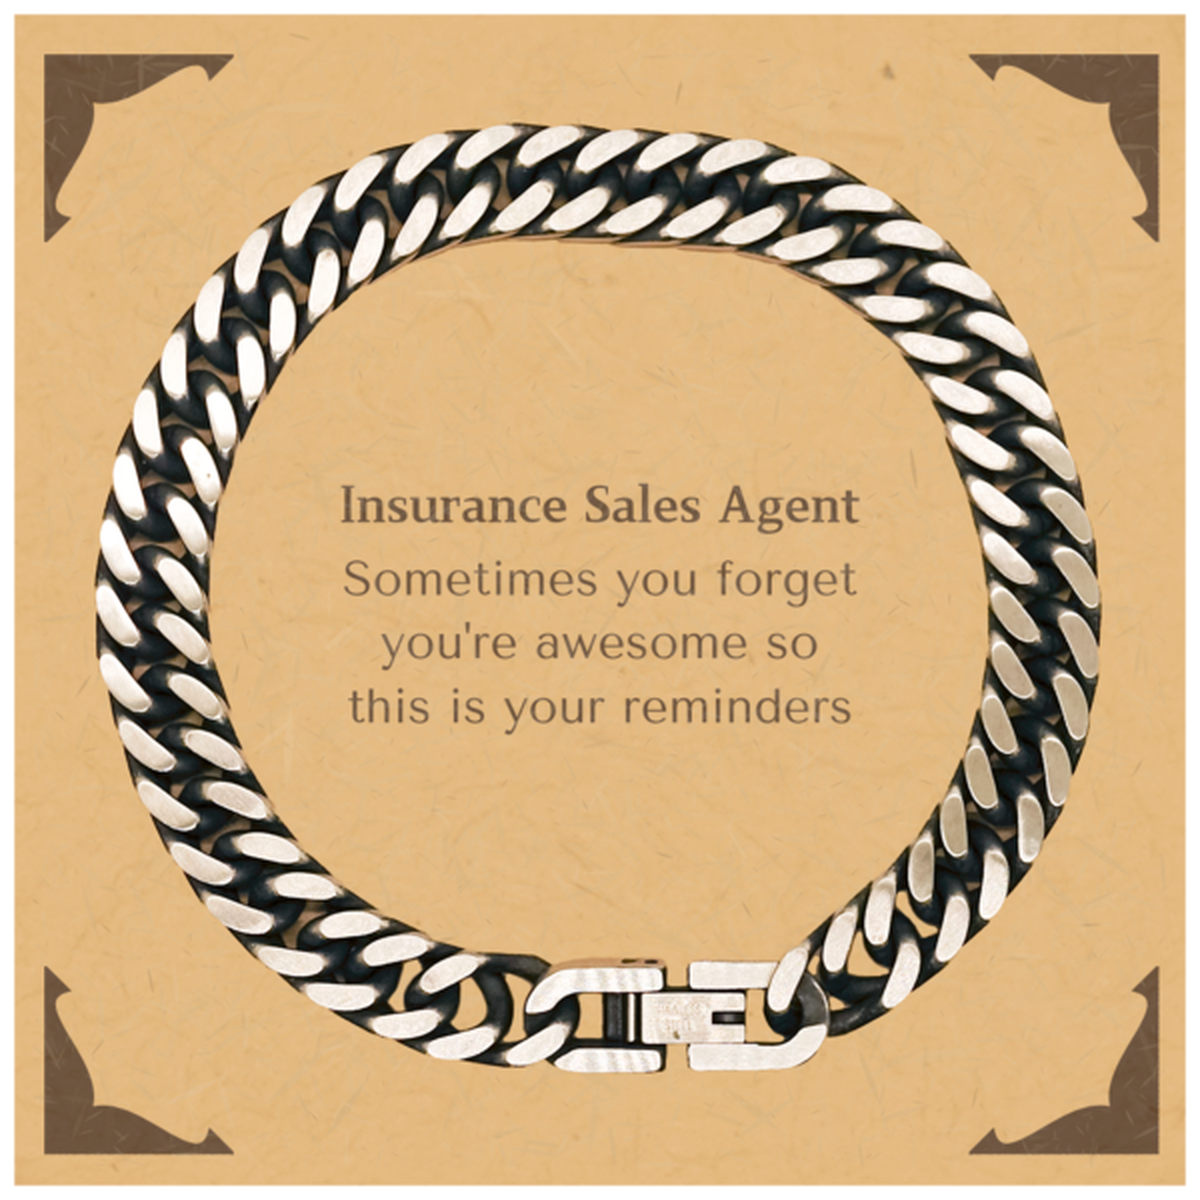 Sentimental Insurance Sales Agent Cuban Link Chain Bracelet, Insurance Sales Agent Sometimes you forget you're awesome so this is your reminders, Graduation Christmas Birthday Gifts for Insurance Sales Agent, Men, Women, Coworkers